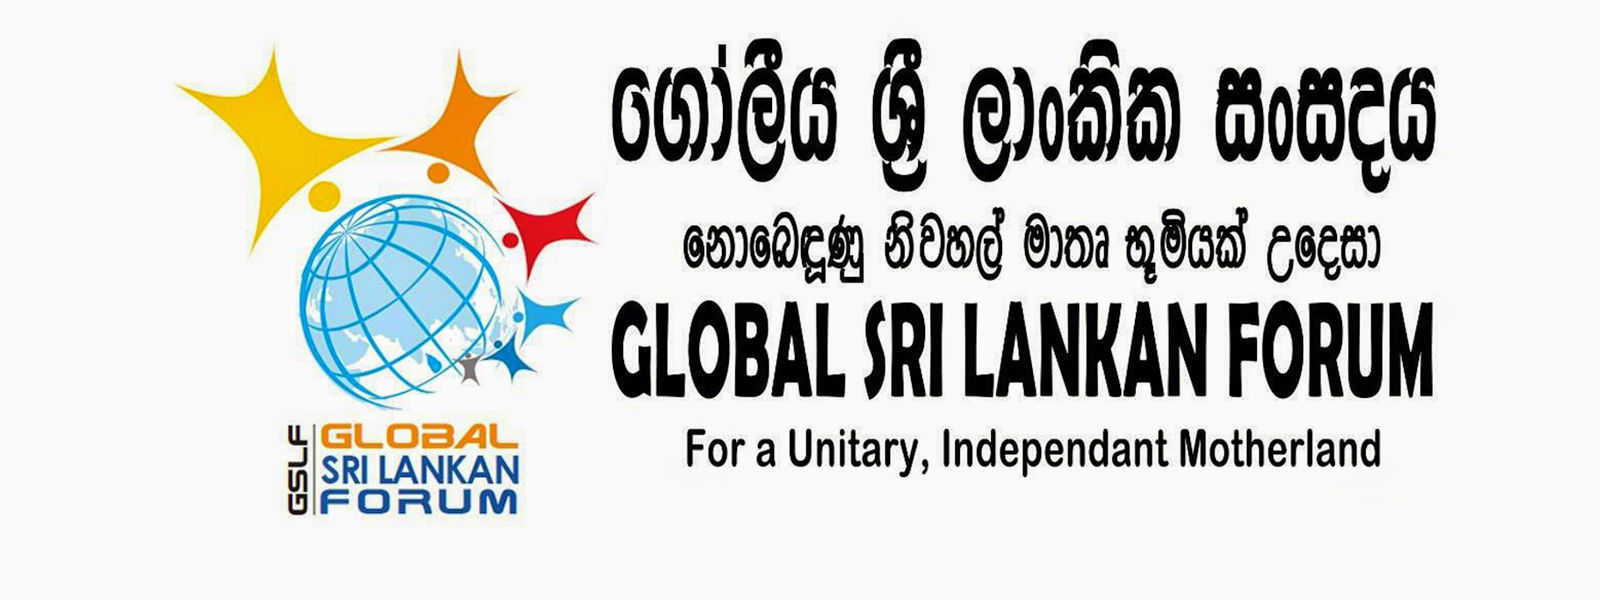 A warning by the Global Sri Lankan Forum